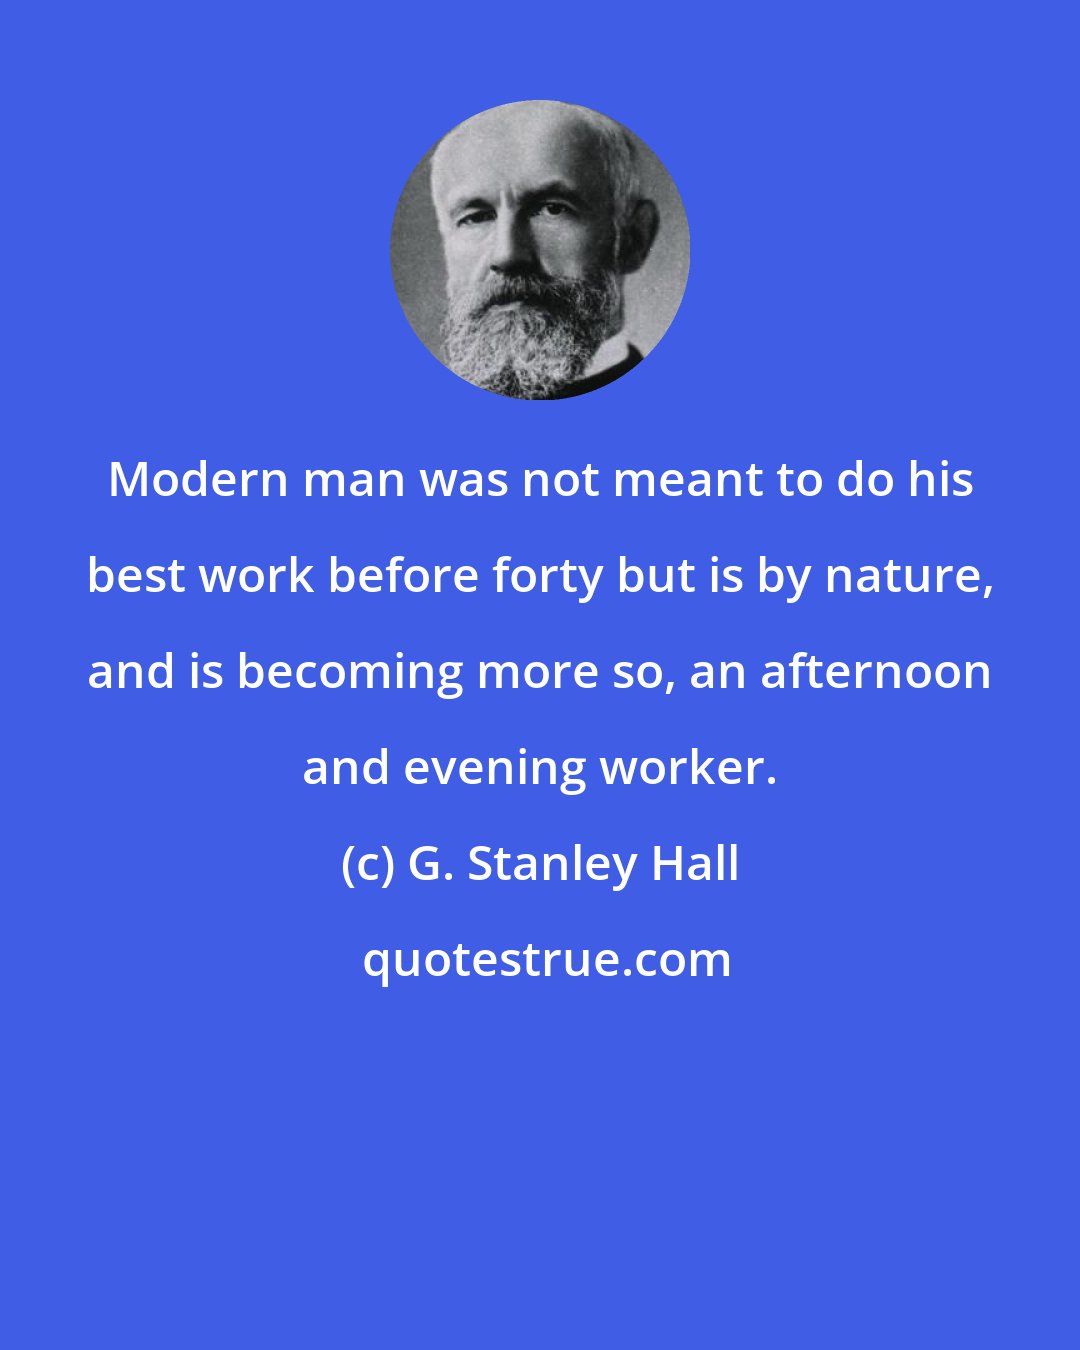 G. Stanley Hall: Modern man was not meant to do his best work before forty but is by nature, and is becoming more so, an afternoon and evening worker.